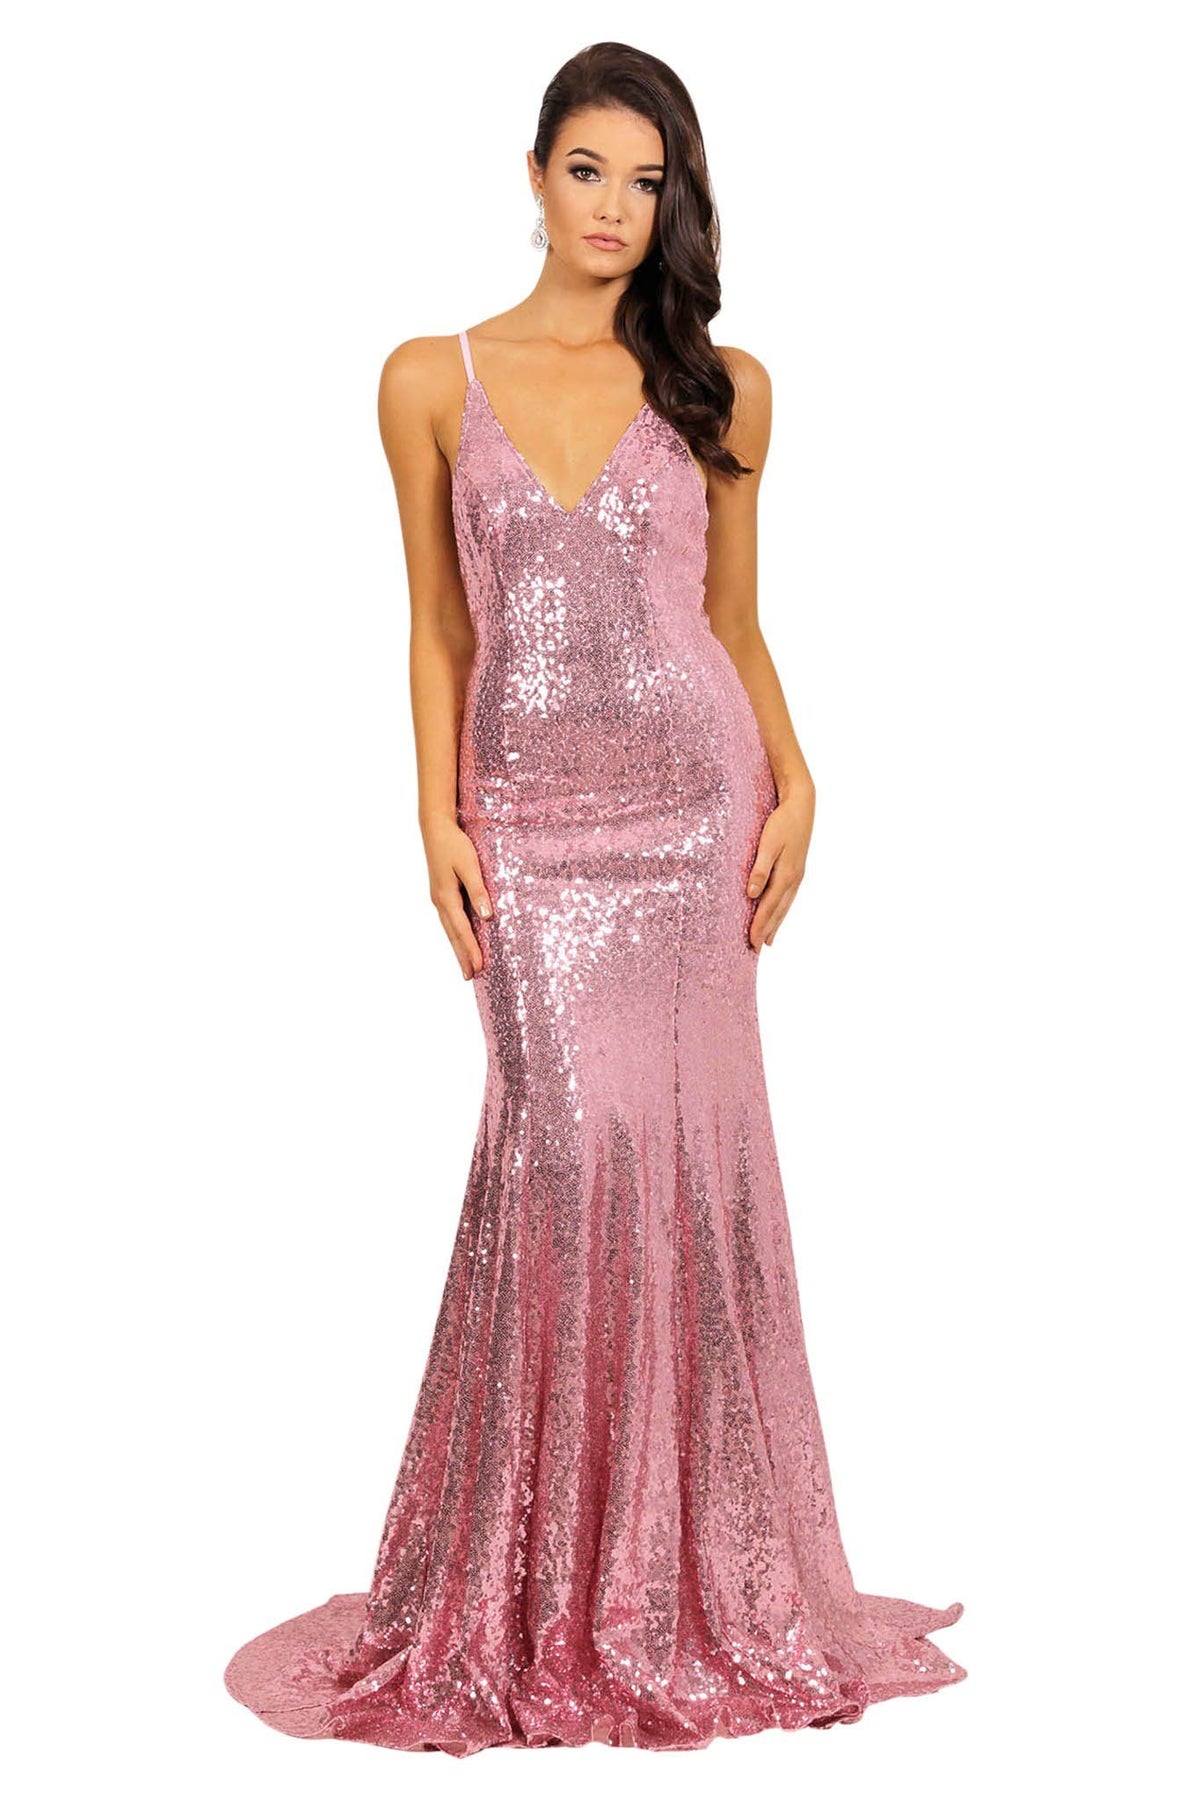 Bright hot pink sequin sleeveless long evening gown with deep V neckline, crisscross back straps, V open back, and long train